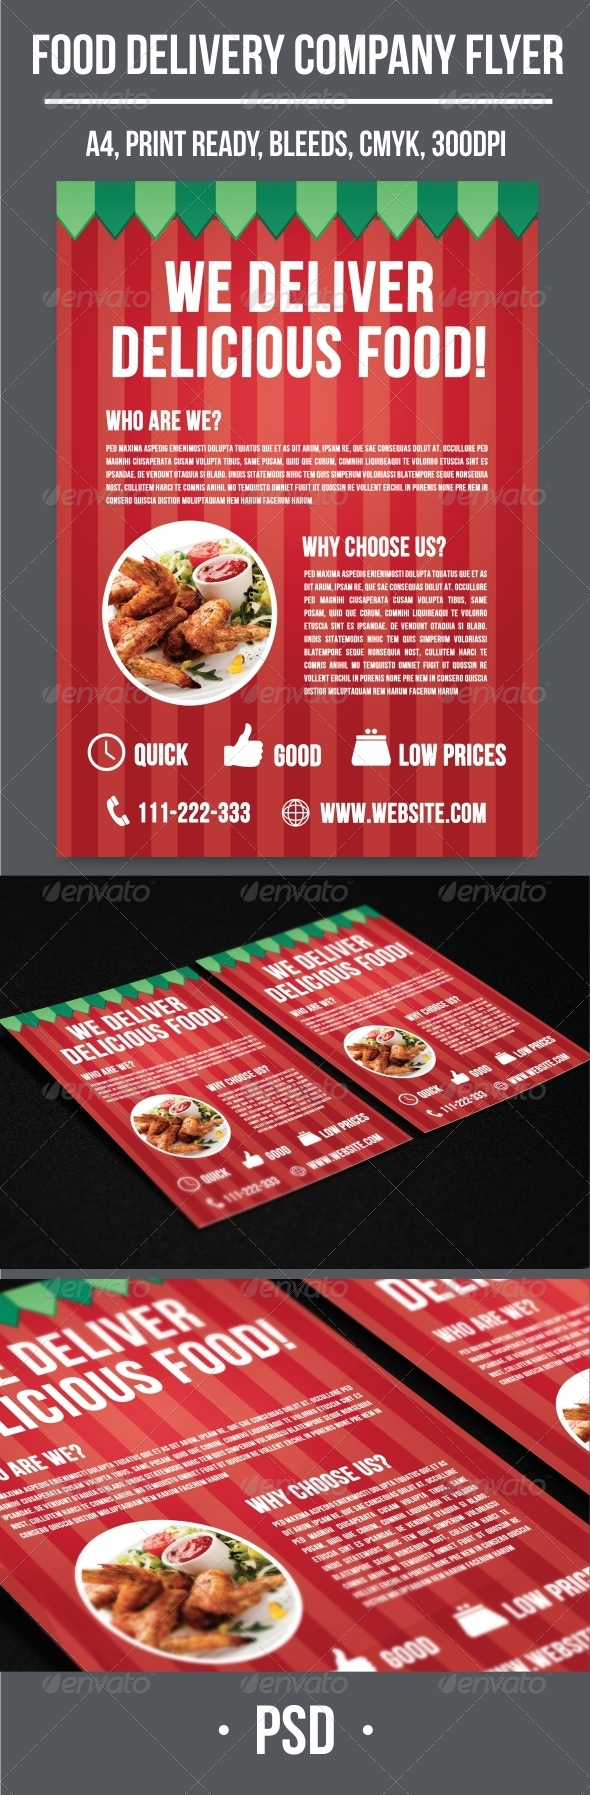 Food Delivery Company Flyer Intended For Food Delivery Flyer Template Intended For Food Delivery Flyer Template